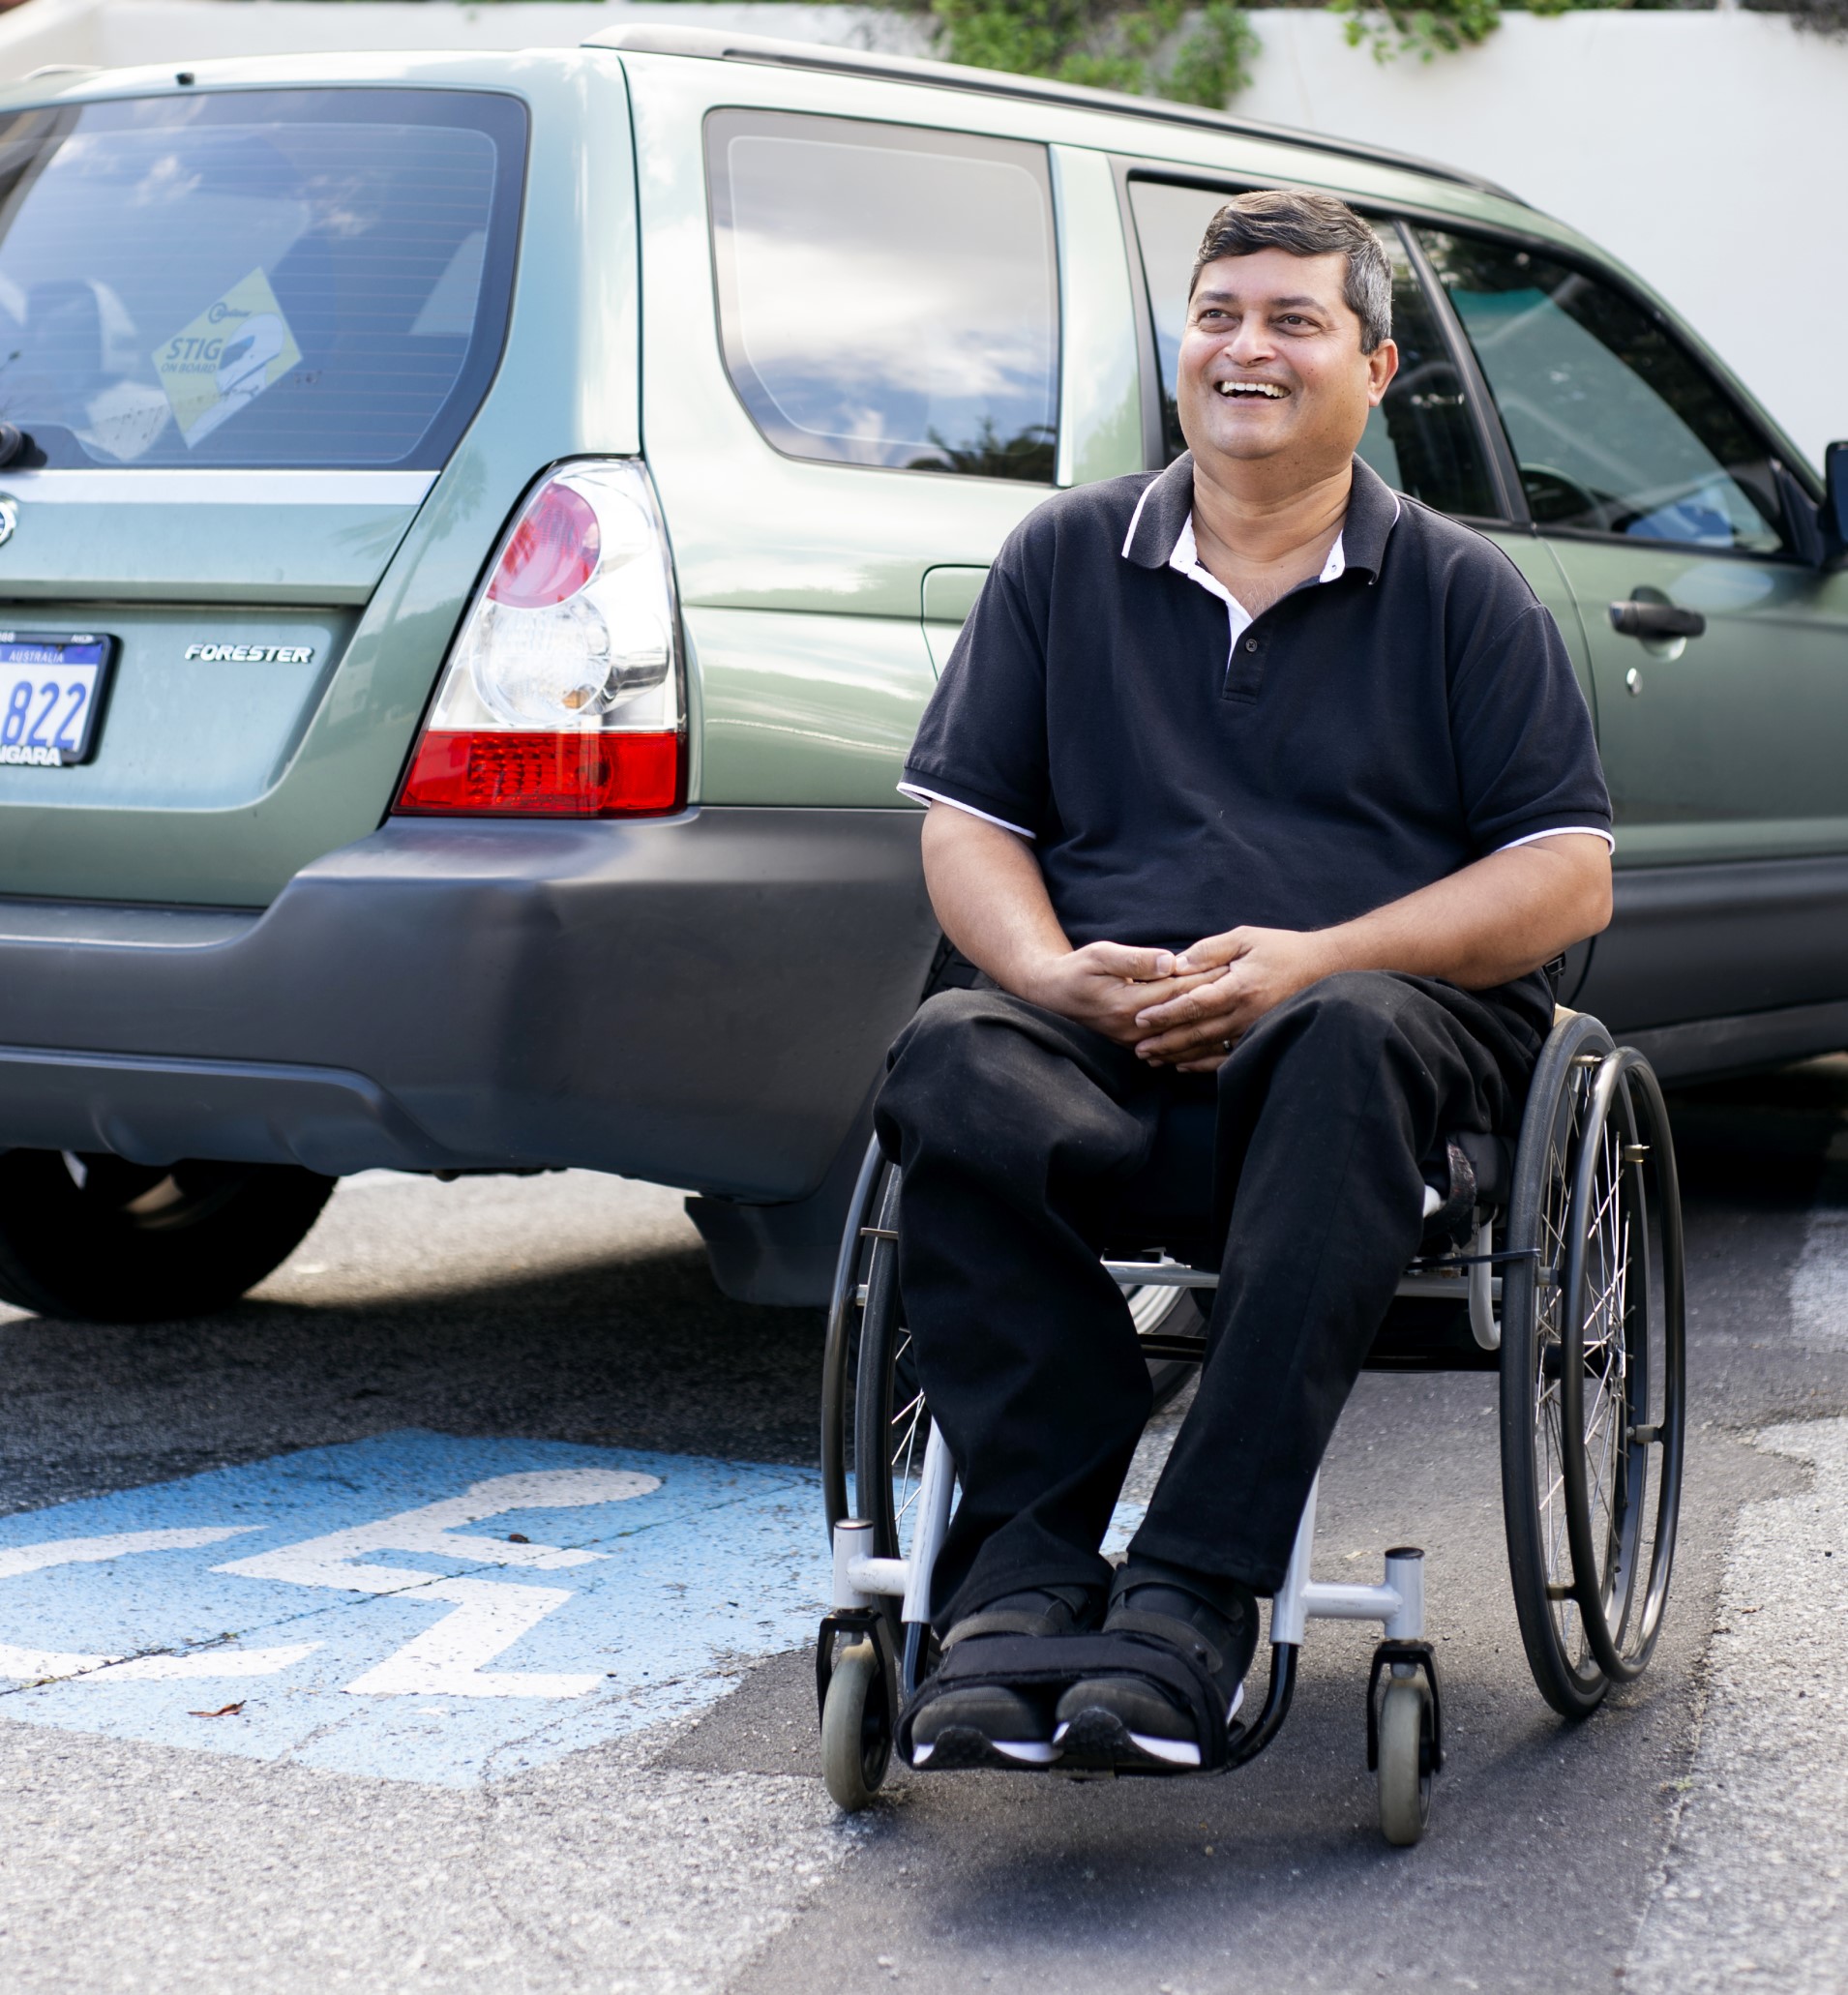 A man with dark hair, wearing all black, sitting in his wheelchair in front of a car